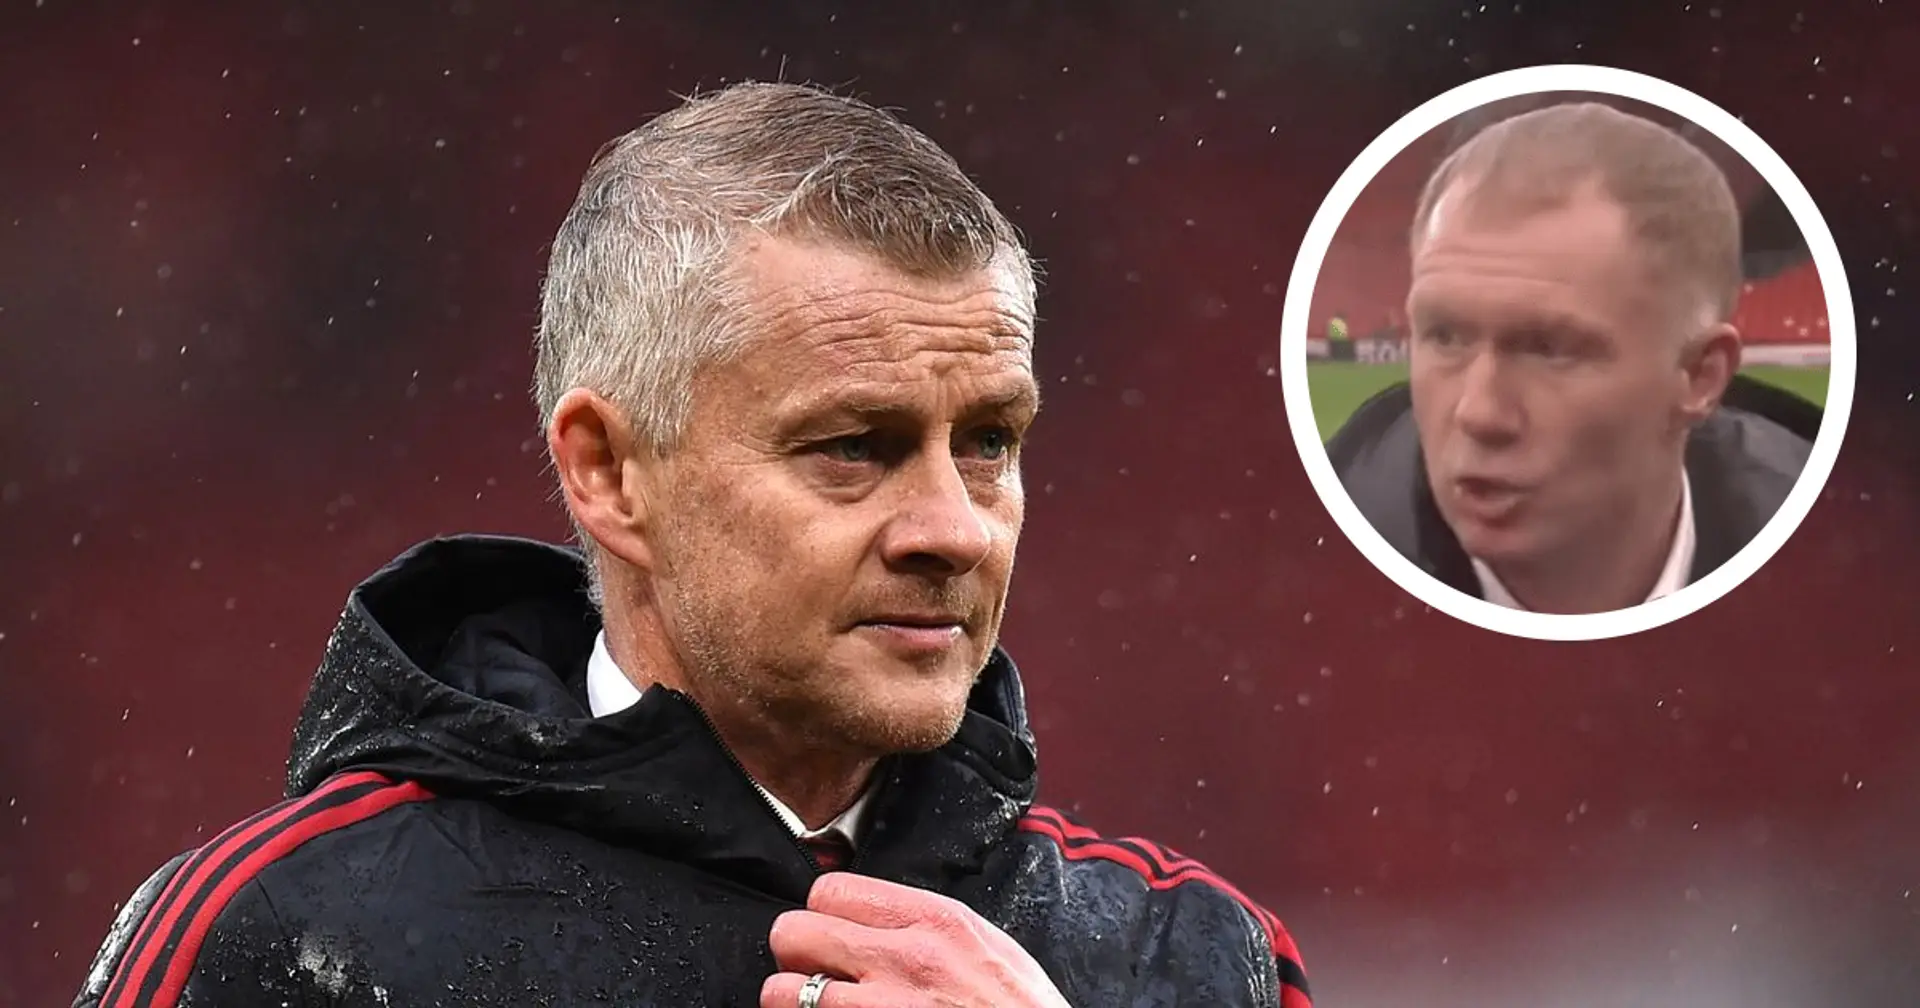 Paul Scholes puts pressure on Ole: 'The conviction has to come from the coach'